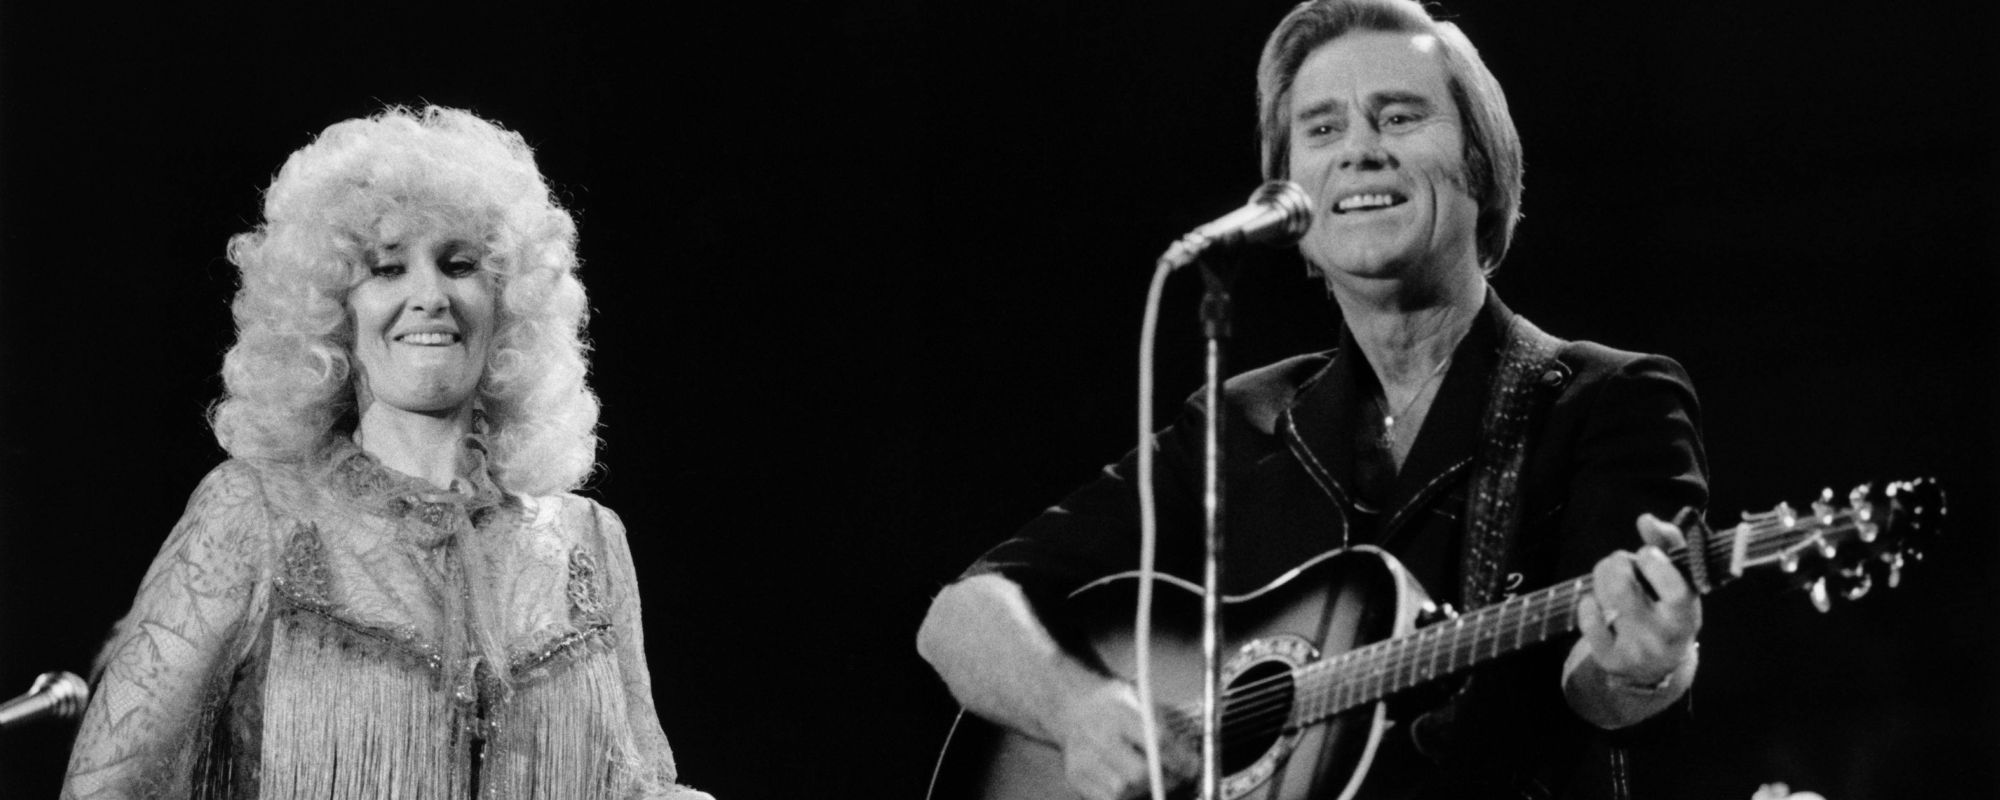 Tammy Wynette and George Jones performing